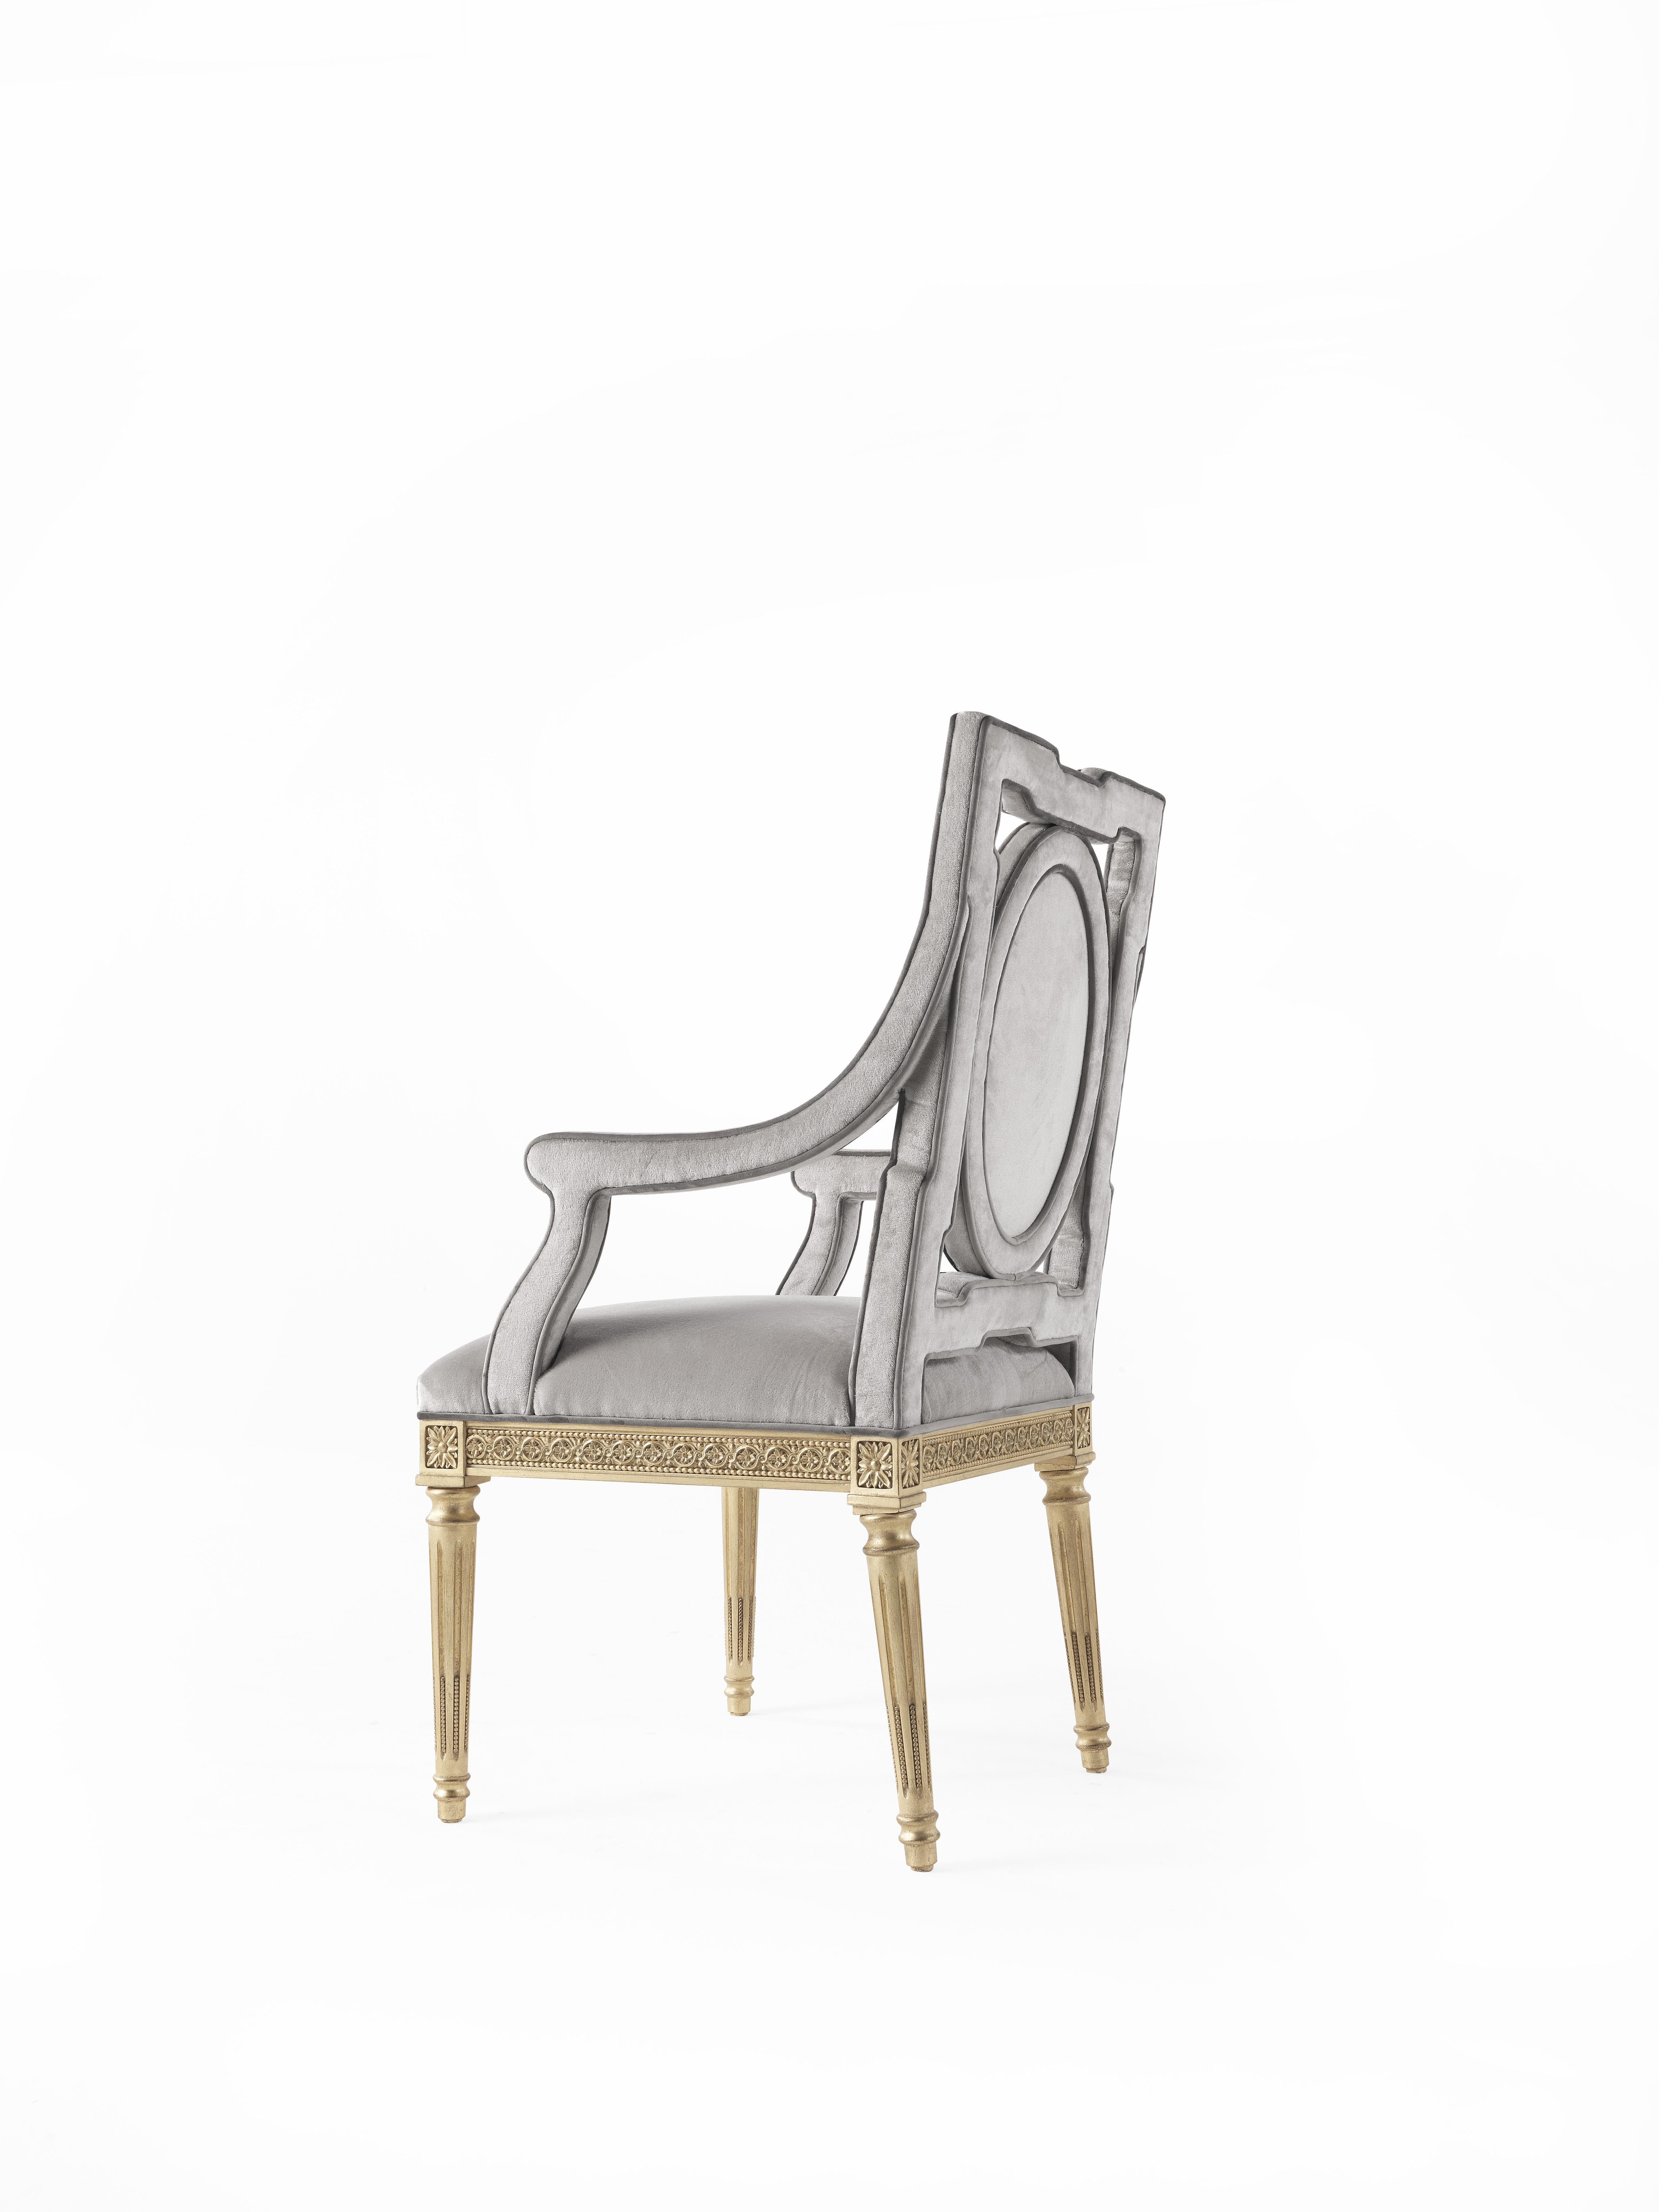 Italian 21st Century Satin Chair with Arms in Wood and Fabric in Style of Louis XVI For Sale